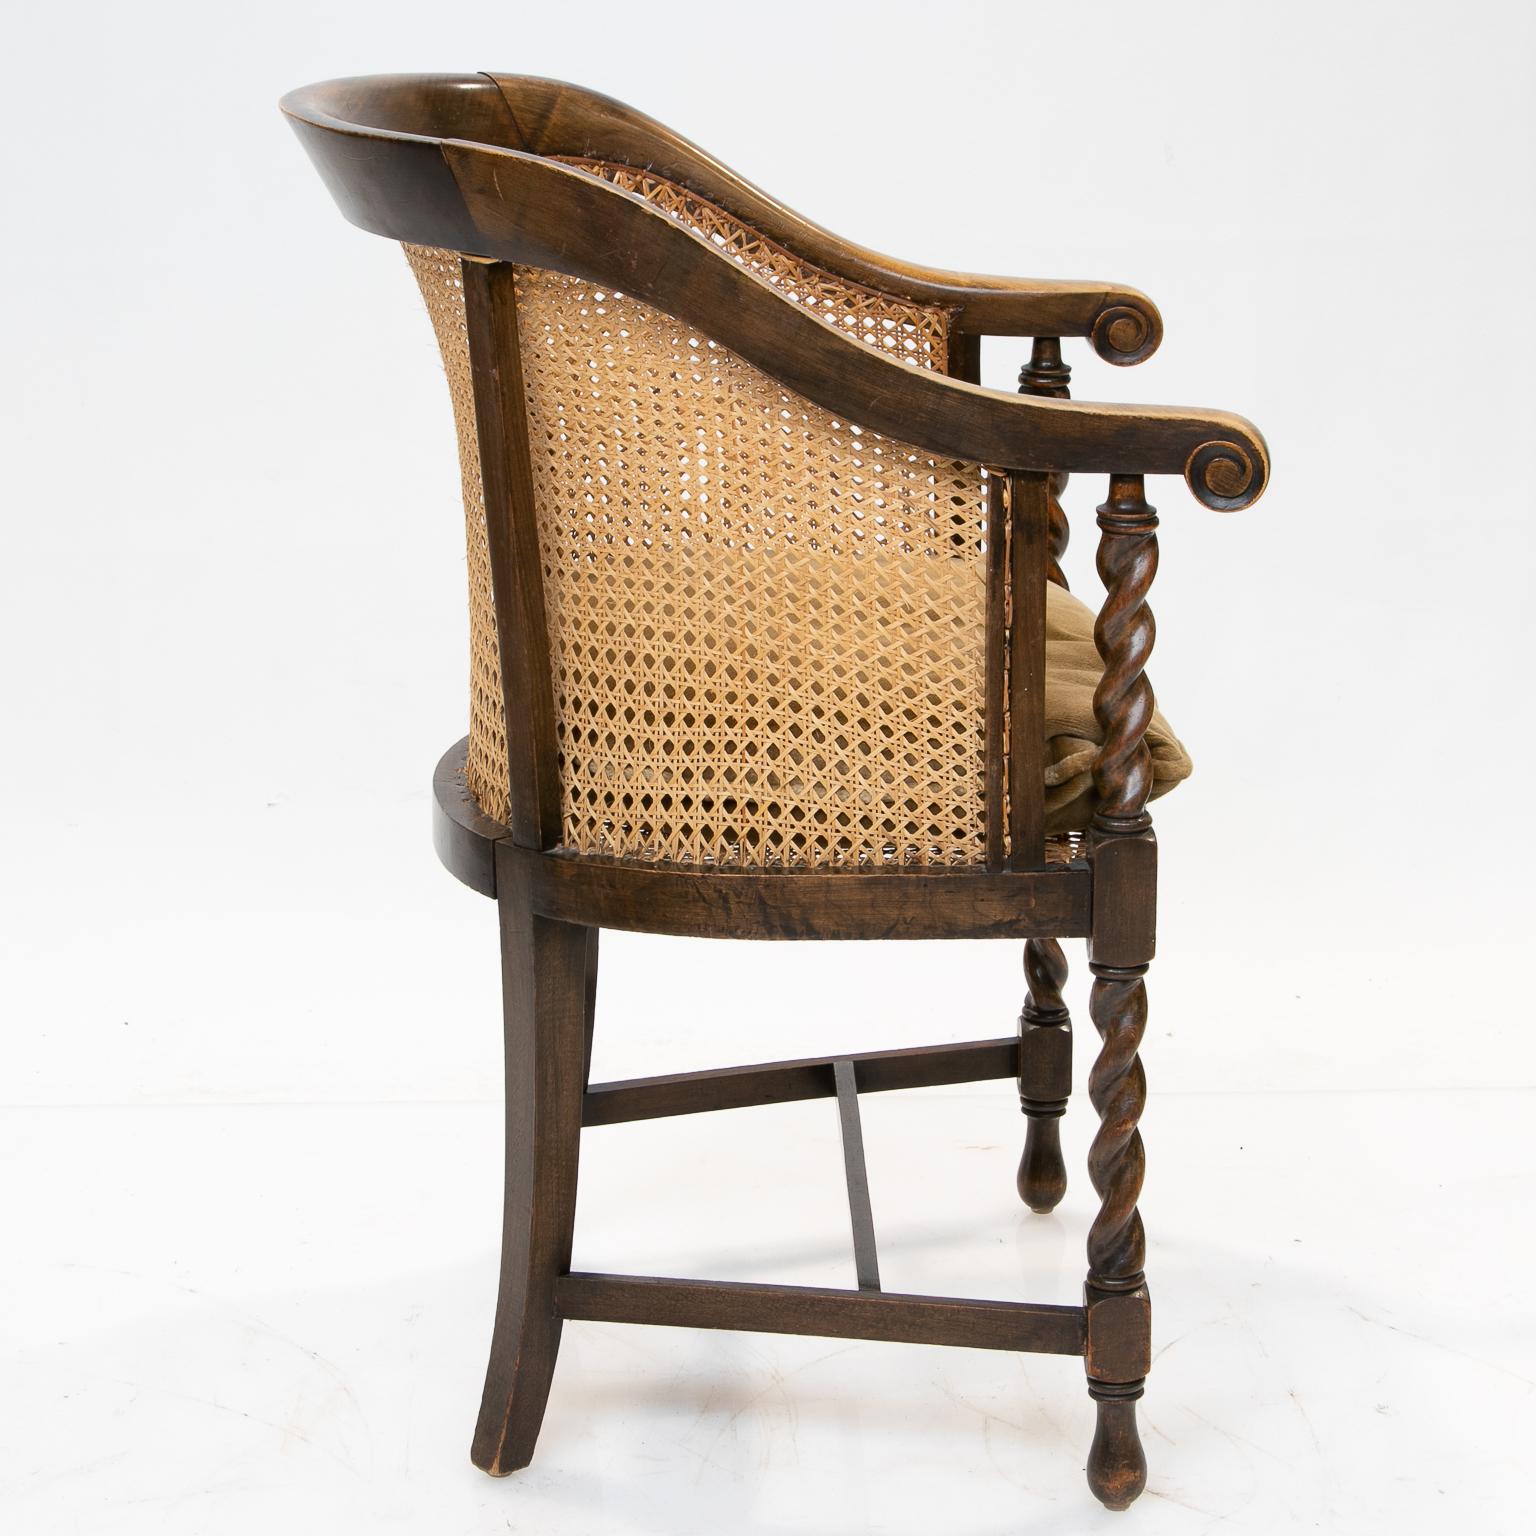 English 19th century barrel back armchair
This chair is a great accent piece for multiple uses. From England and made of elm and walnut with newly cane seat and back. Luxurious patina and color. This has a comfortable barrel back and a new cushion